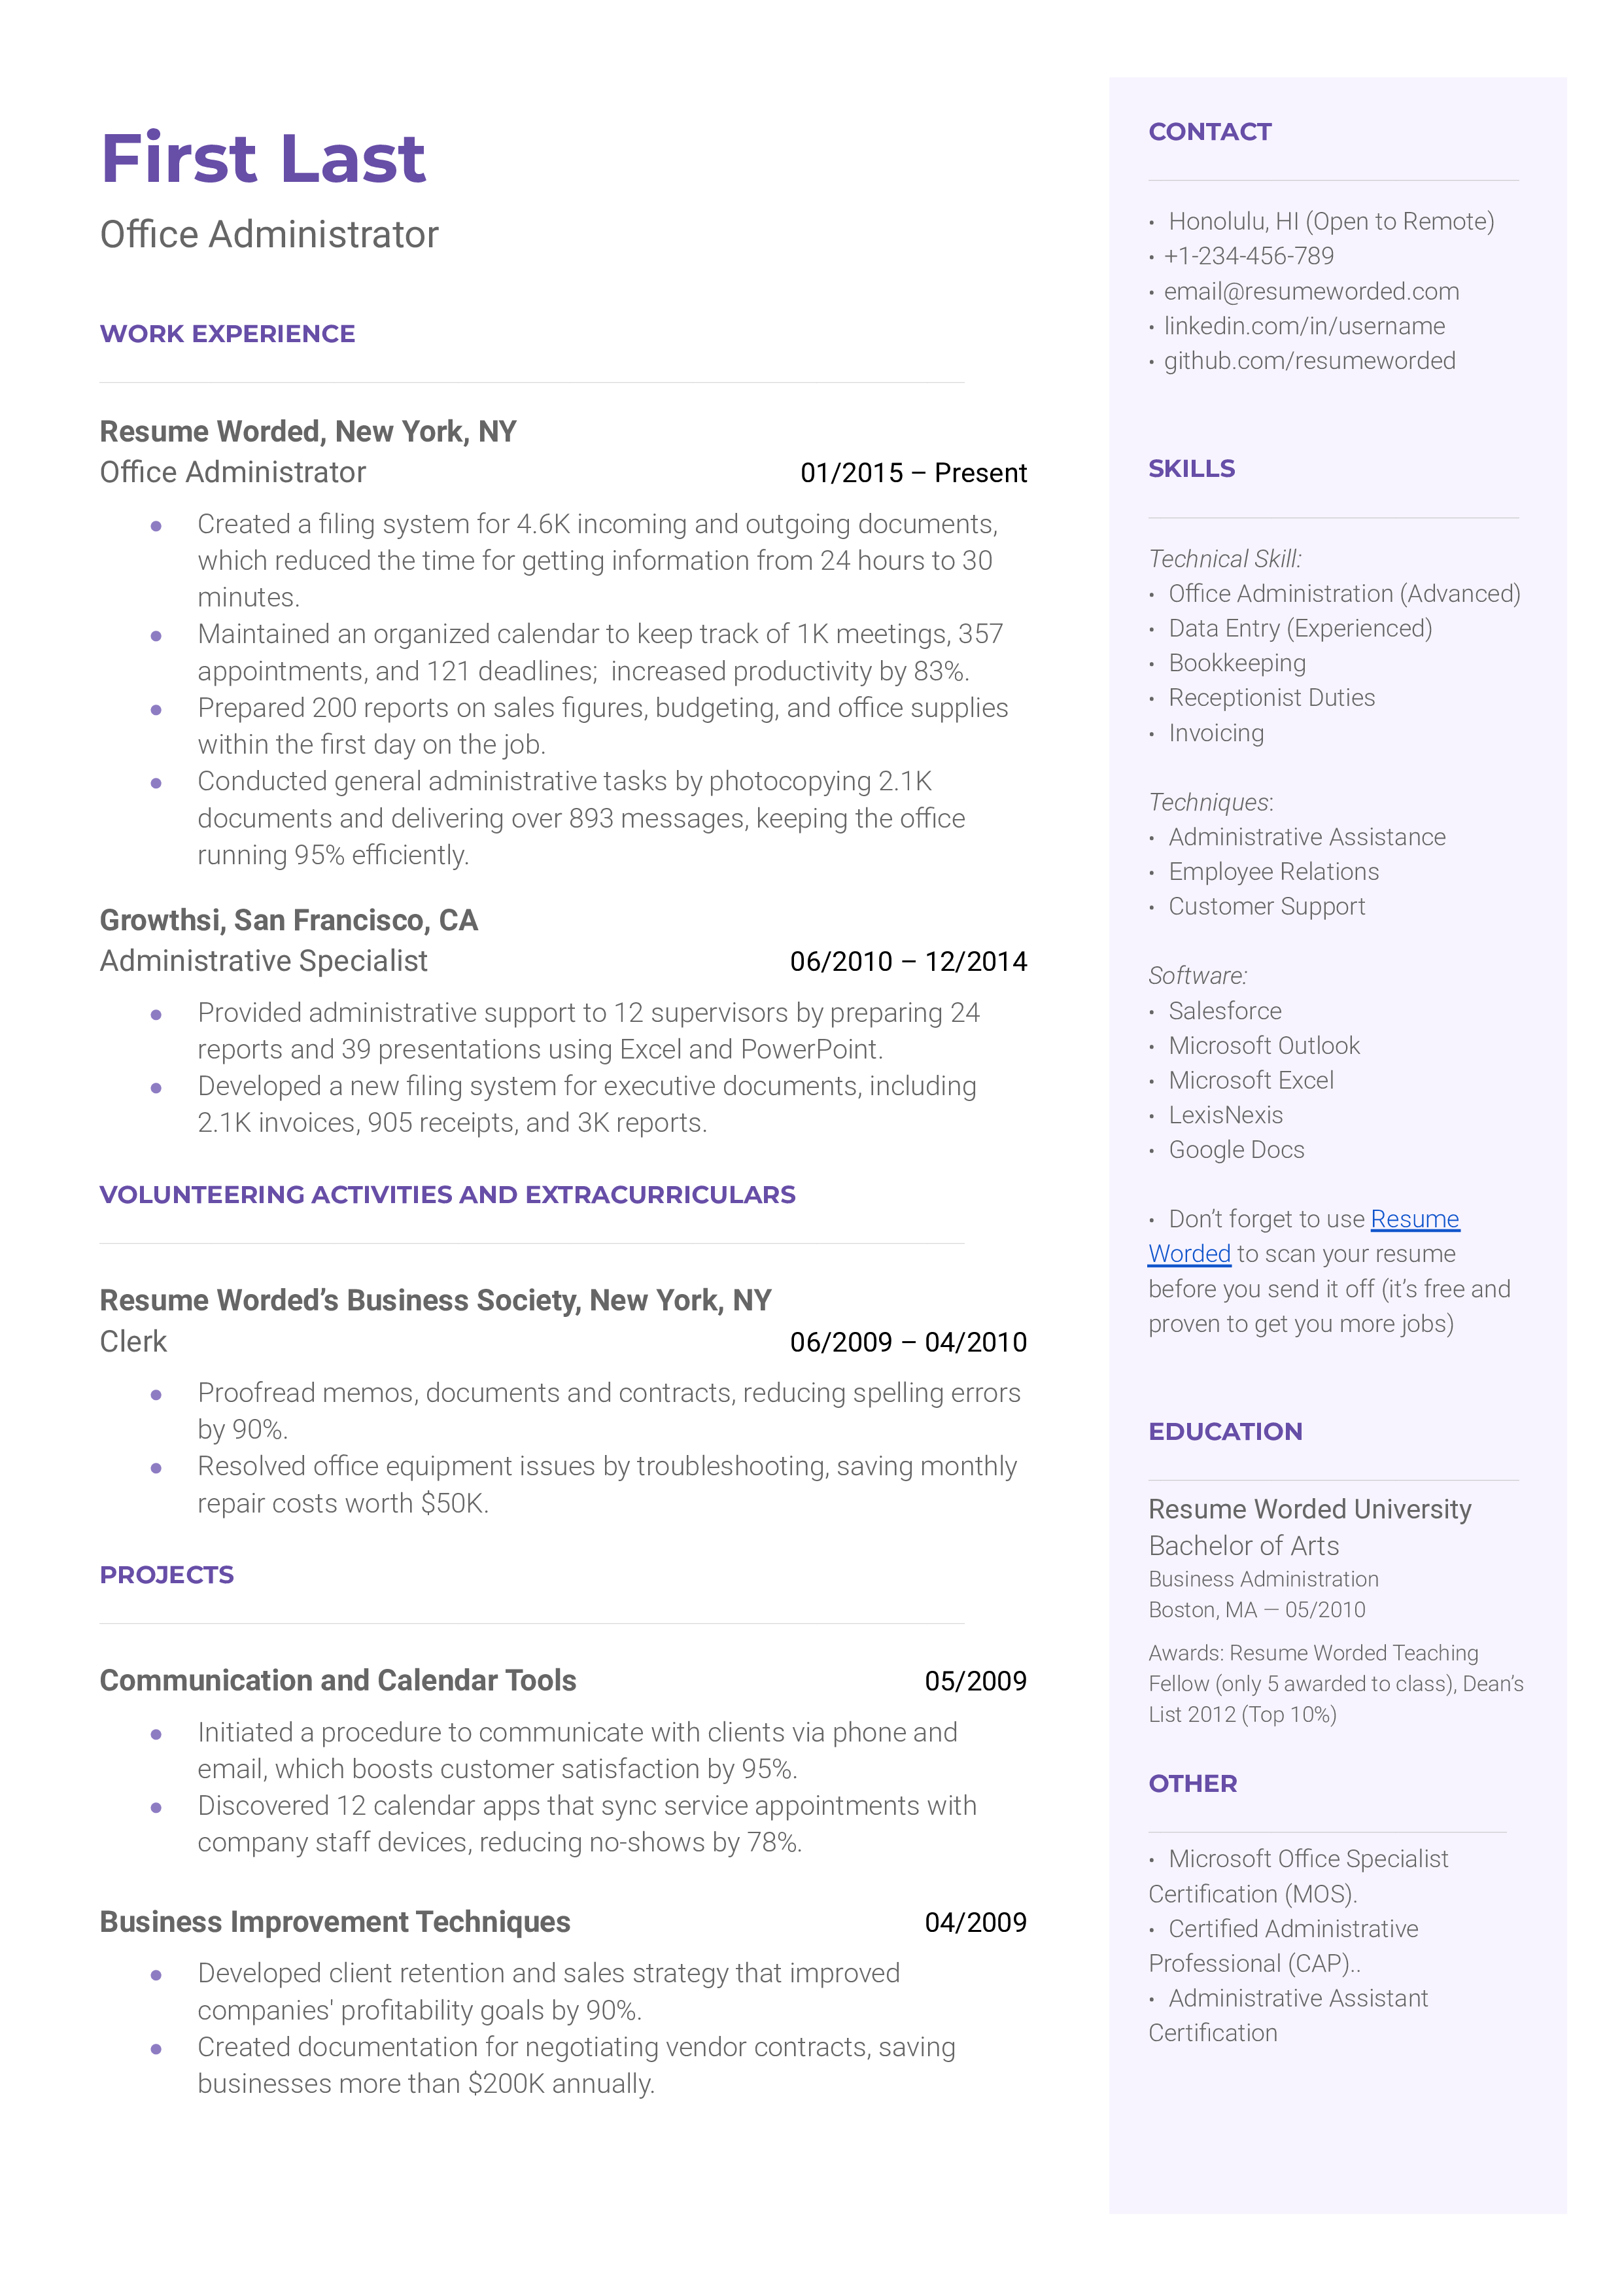 An office administrator resume template using metrics to highlight achievements